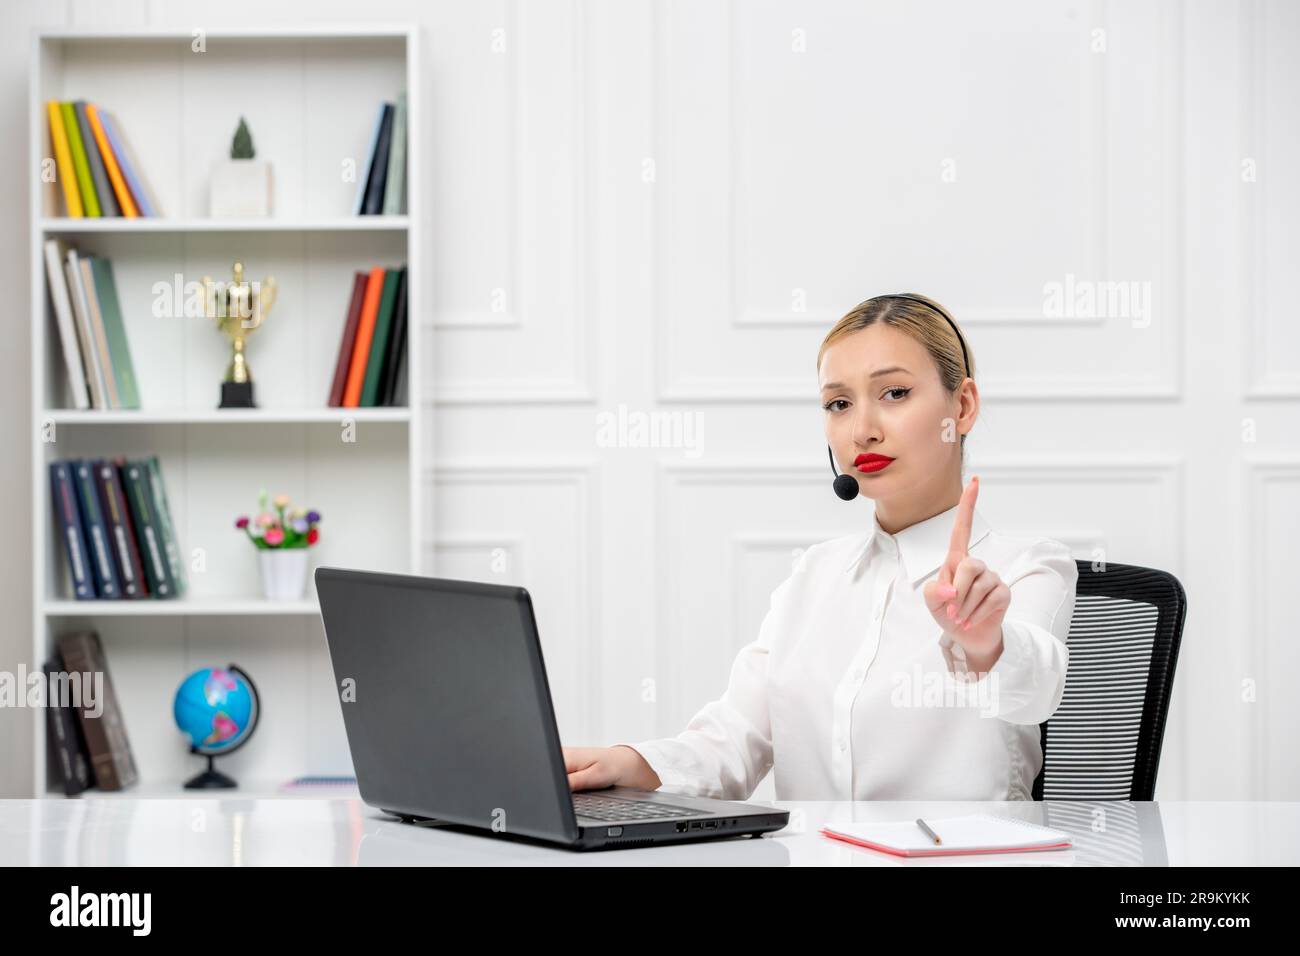 customer service cute blonde girl office shirt with headset and computer showing stop gesture Stock Photo